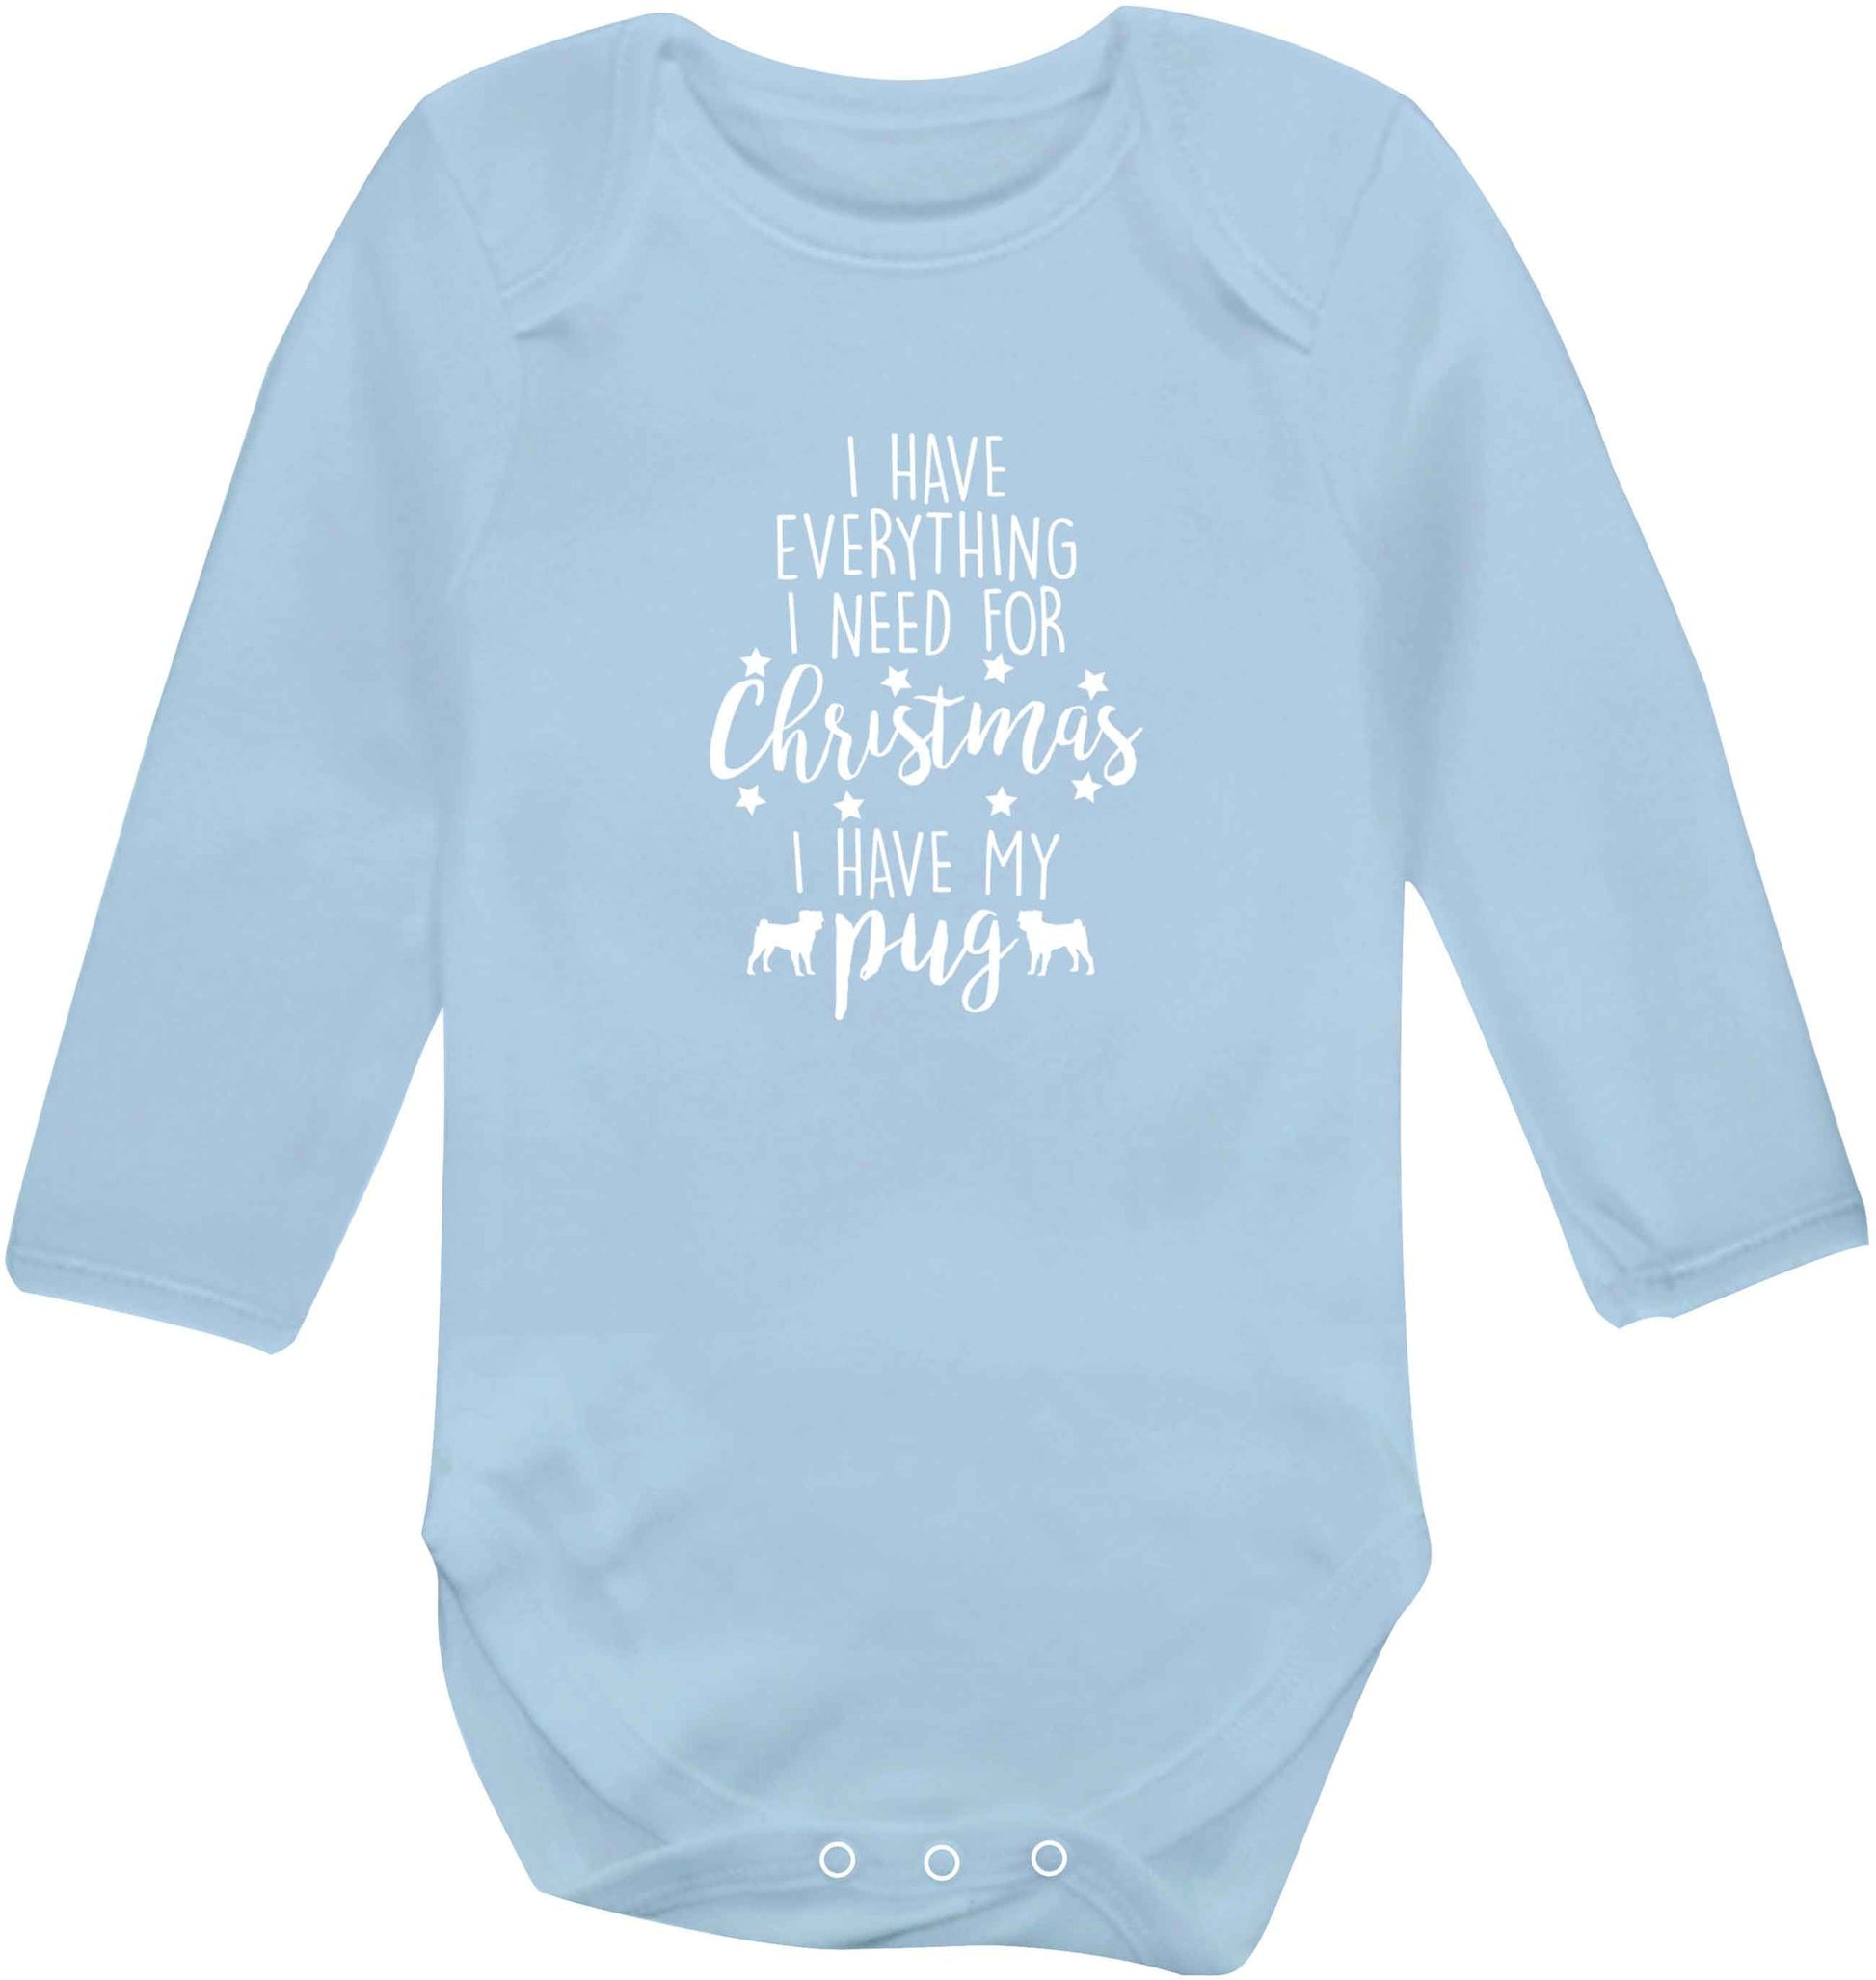 I have everything I need for Christmas I have my pug baby vest long sleeved pale blue 6-12 months